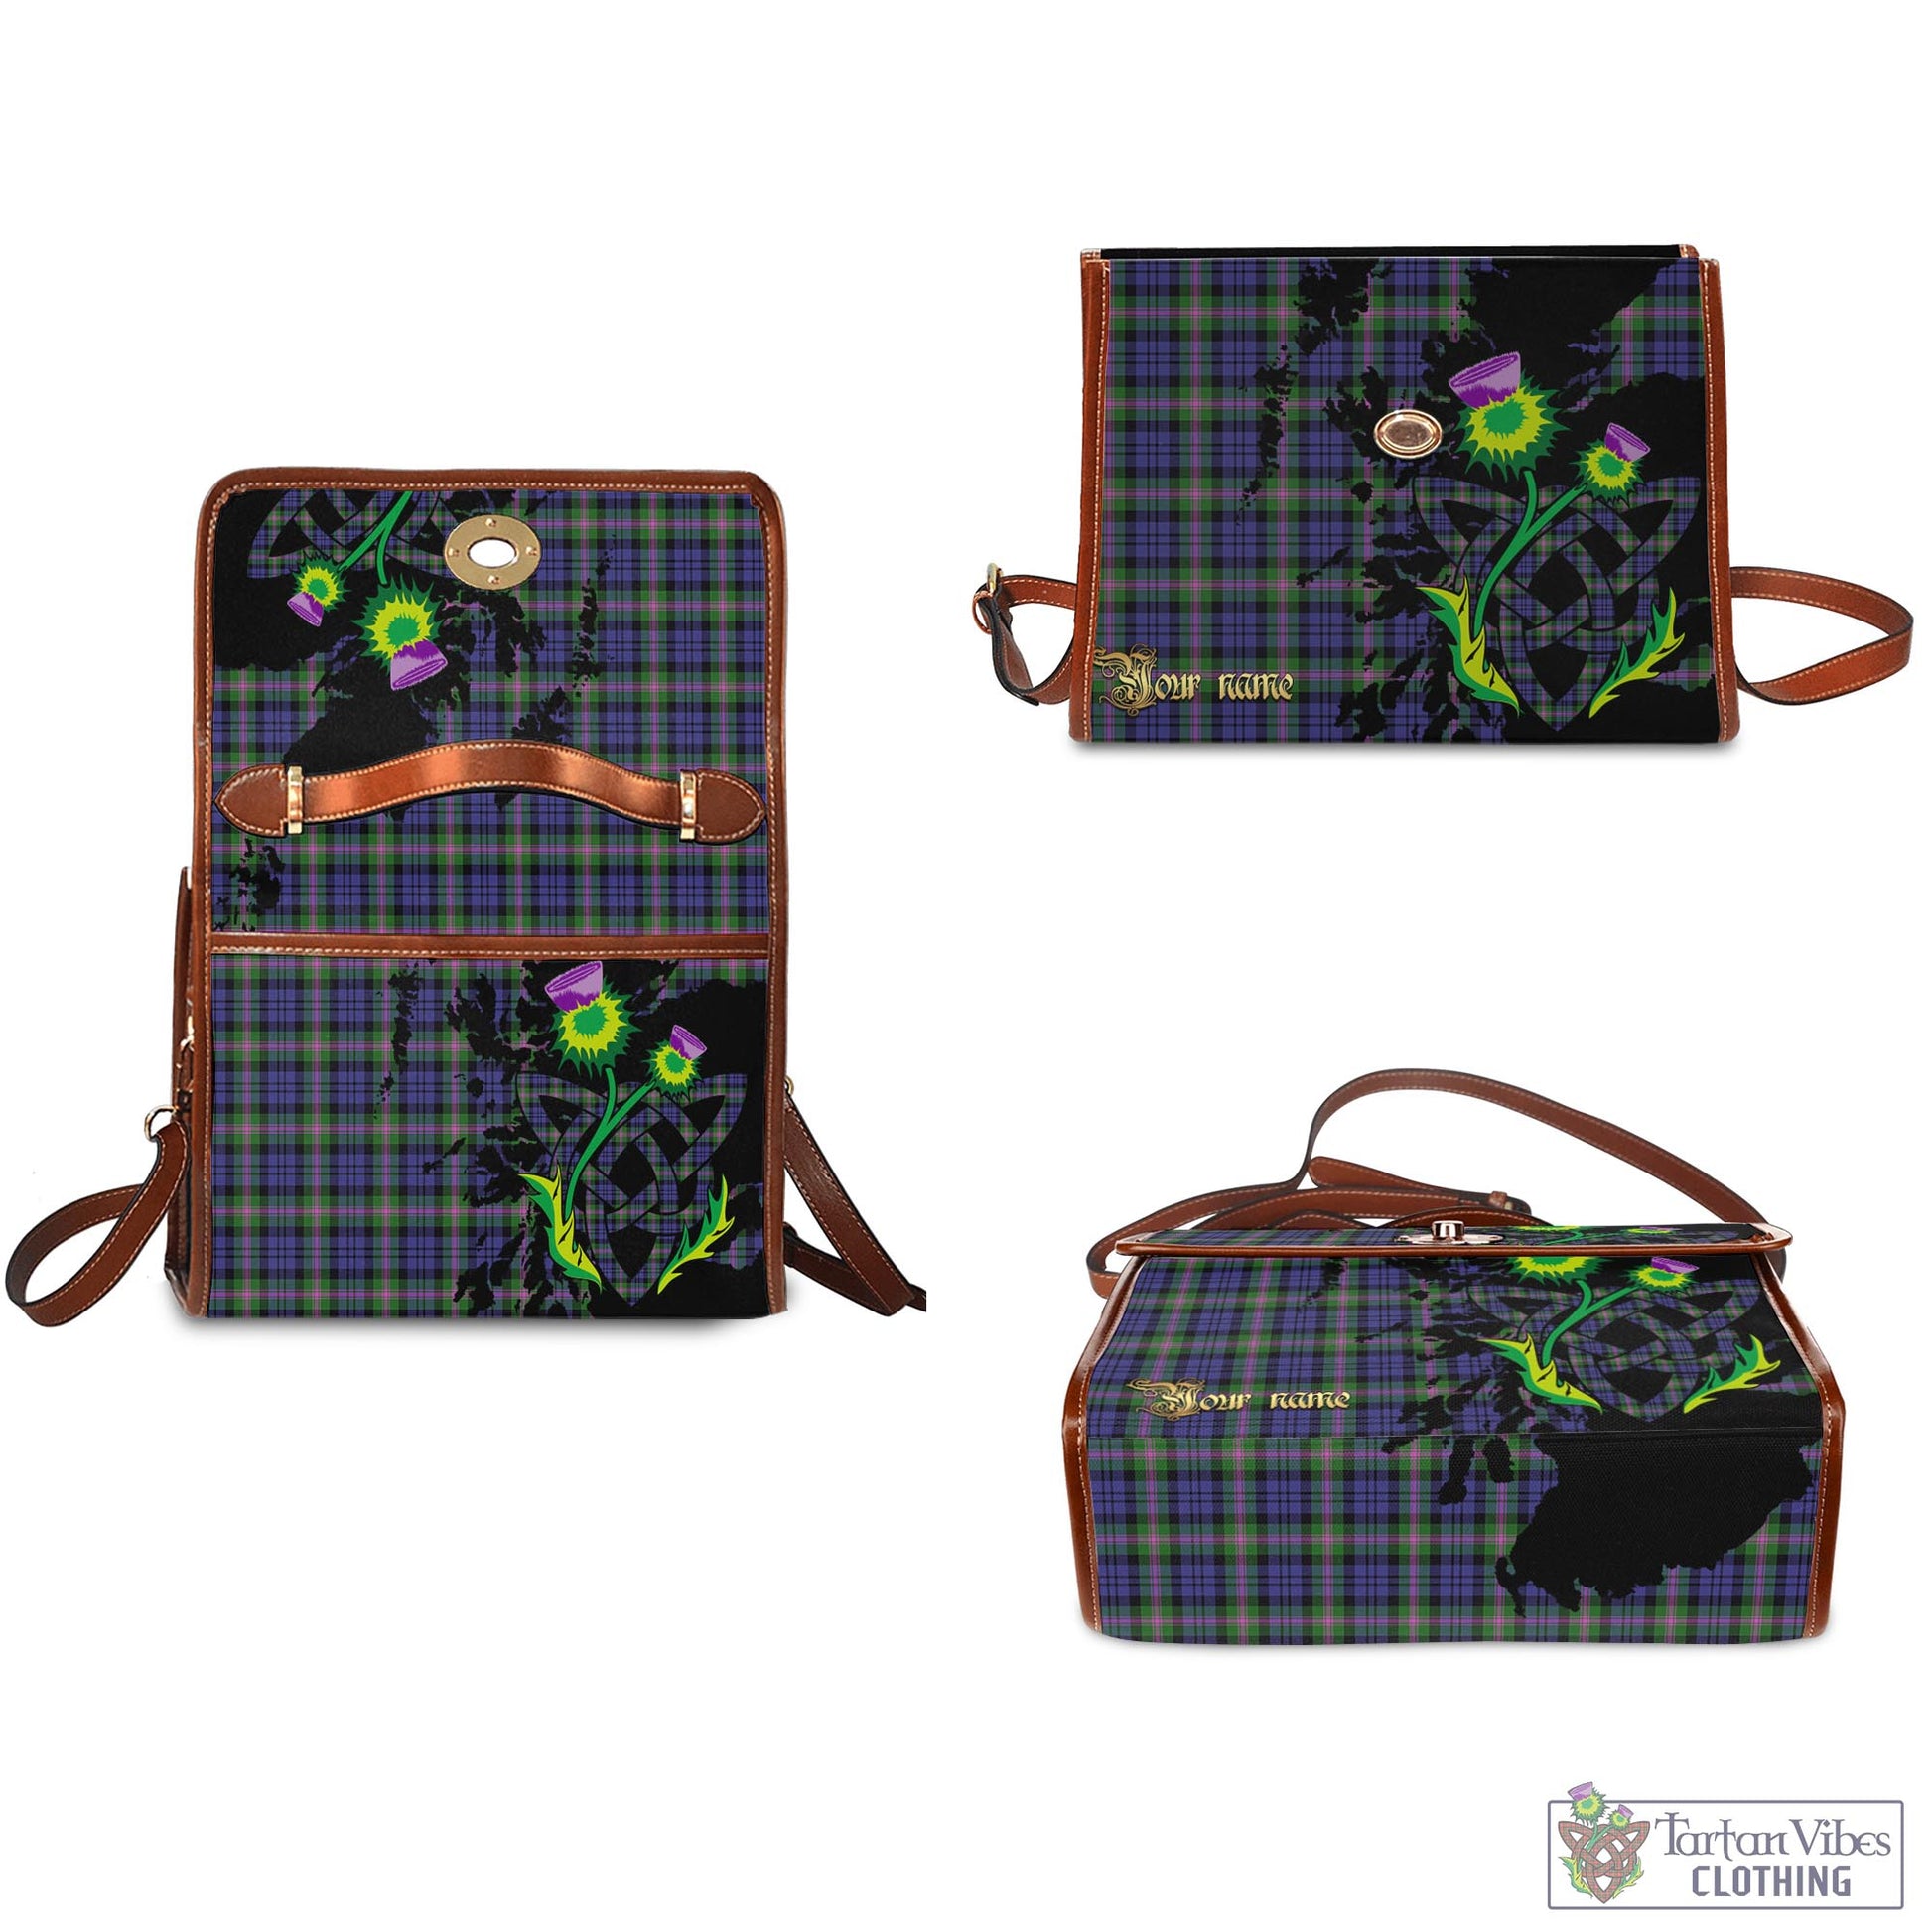 Tartan Vibes Clothing Baird Modern Tartan Waterproof Canvas Bag with Scotland Map and Thistle Celtic Accents